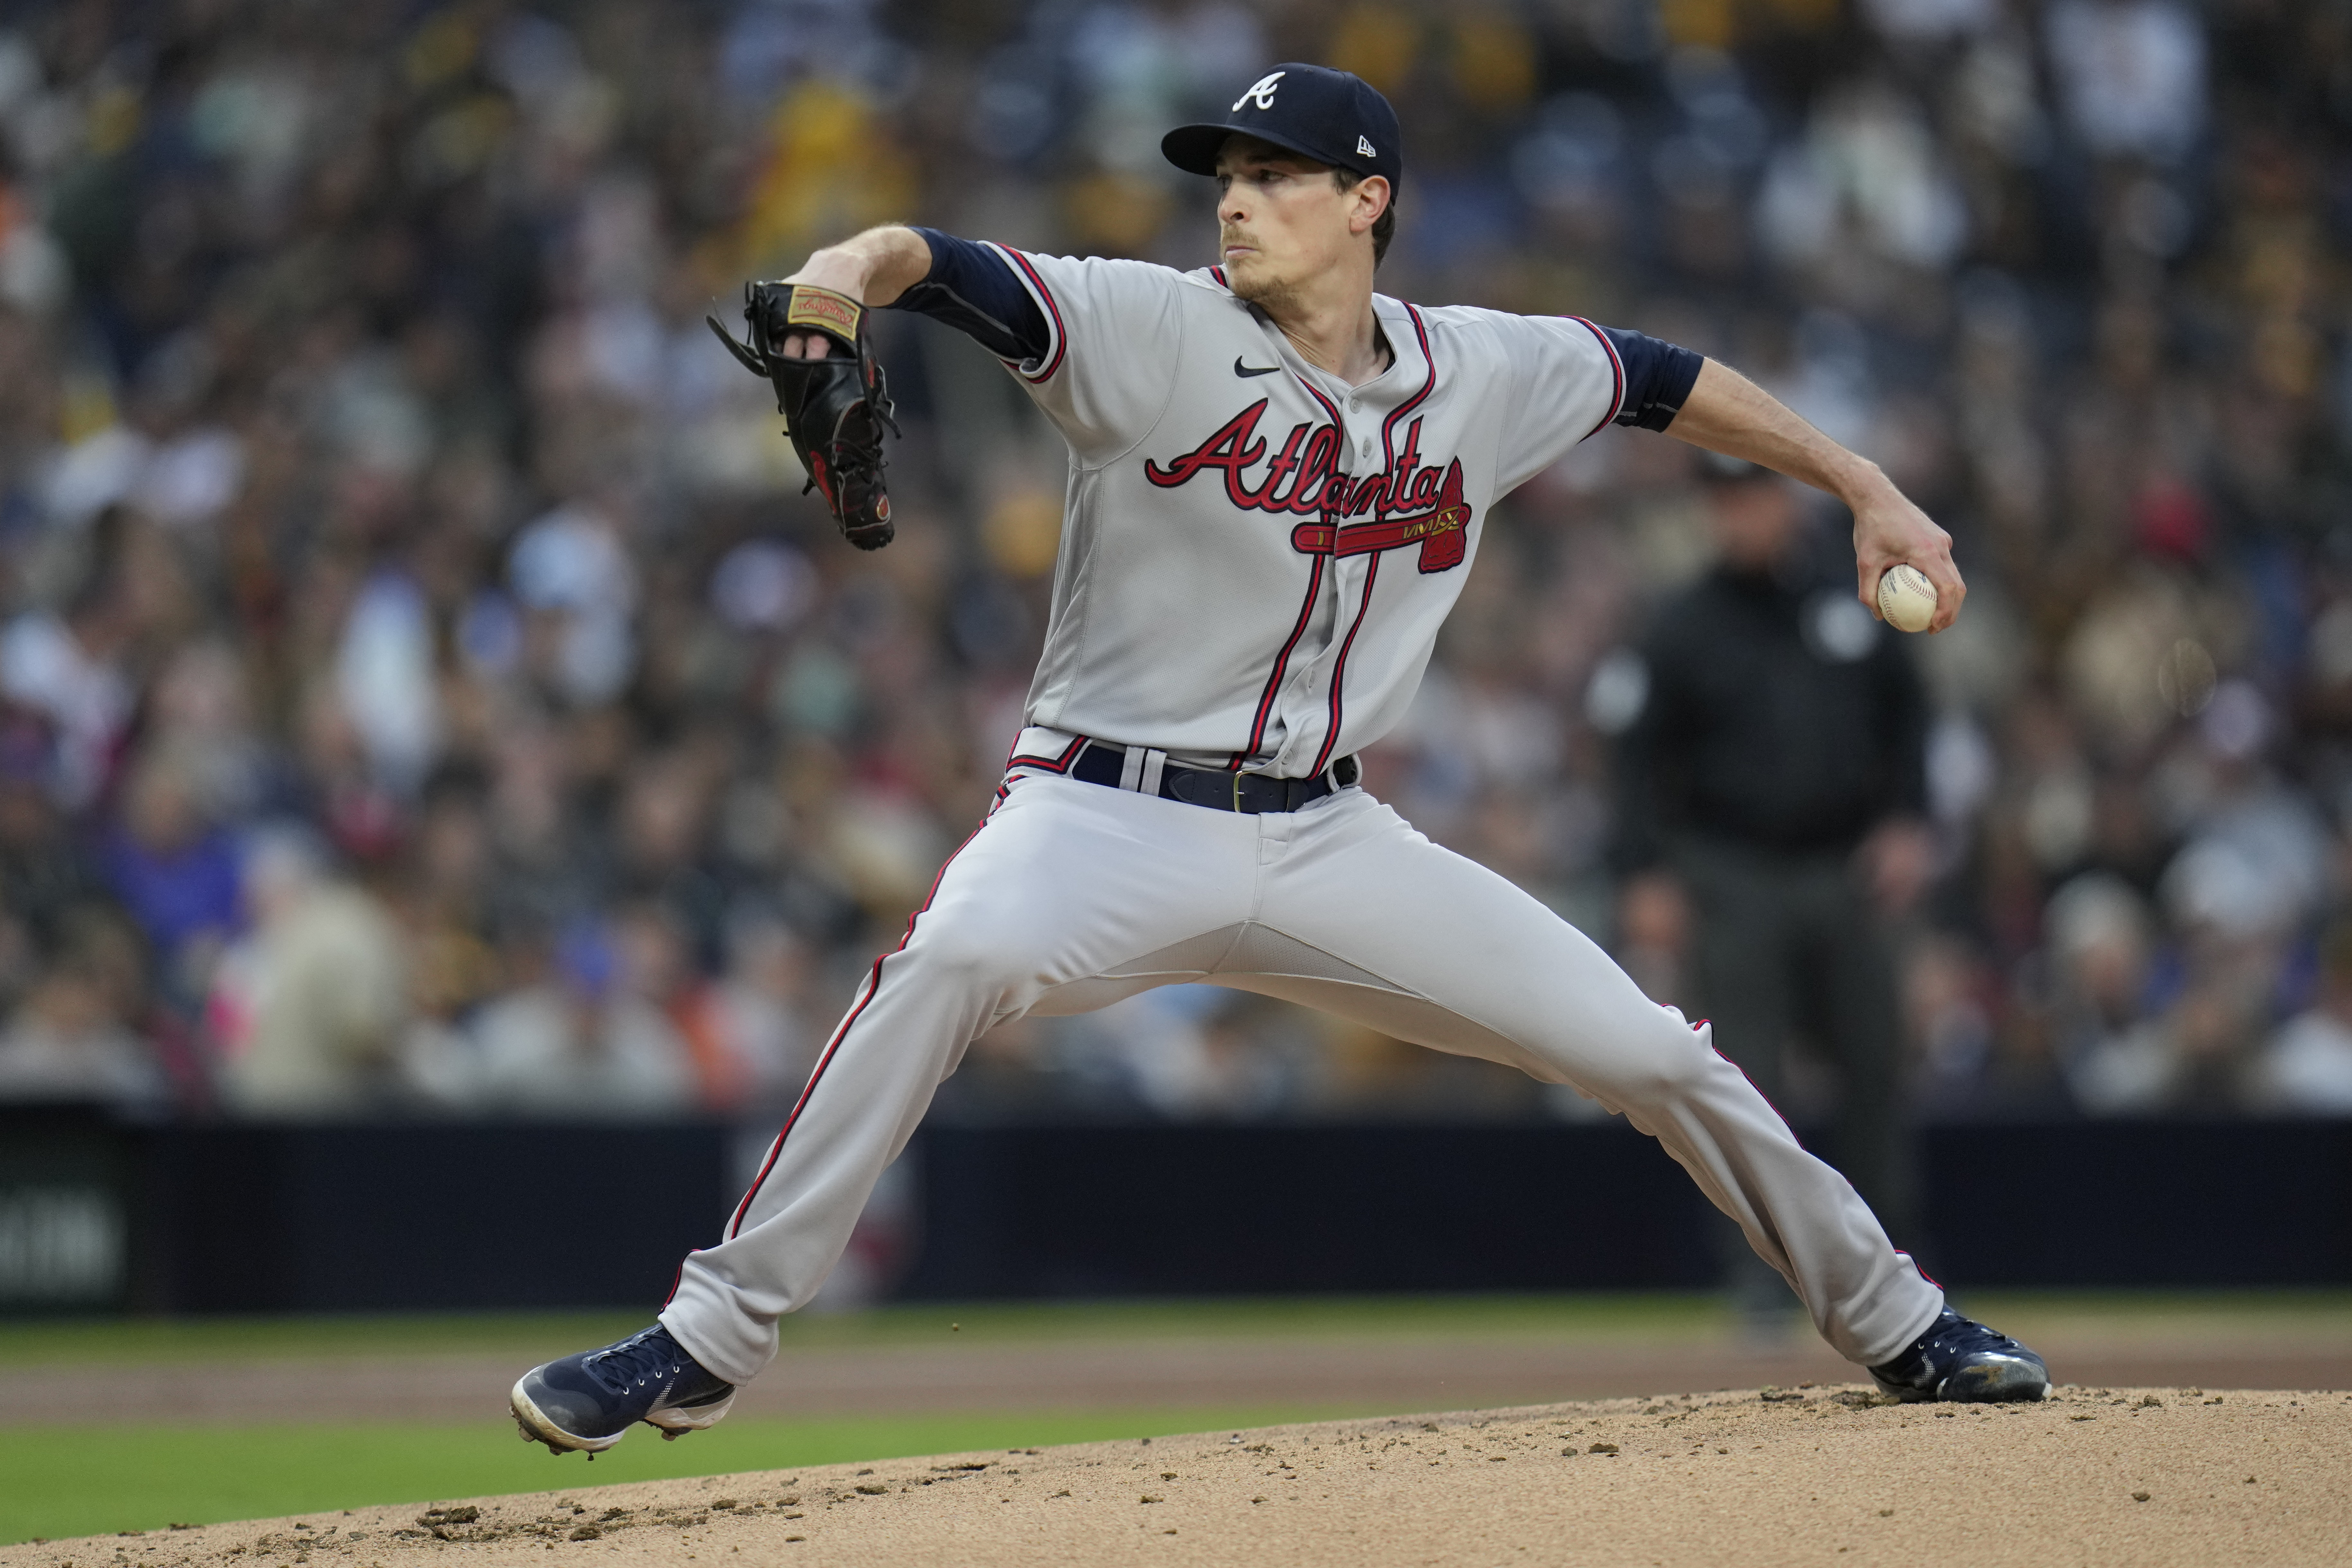 He dives into literally everything': Behind Max Fried's talent, prep is key